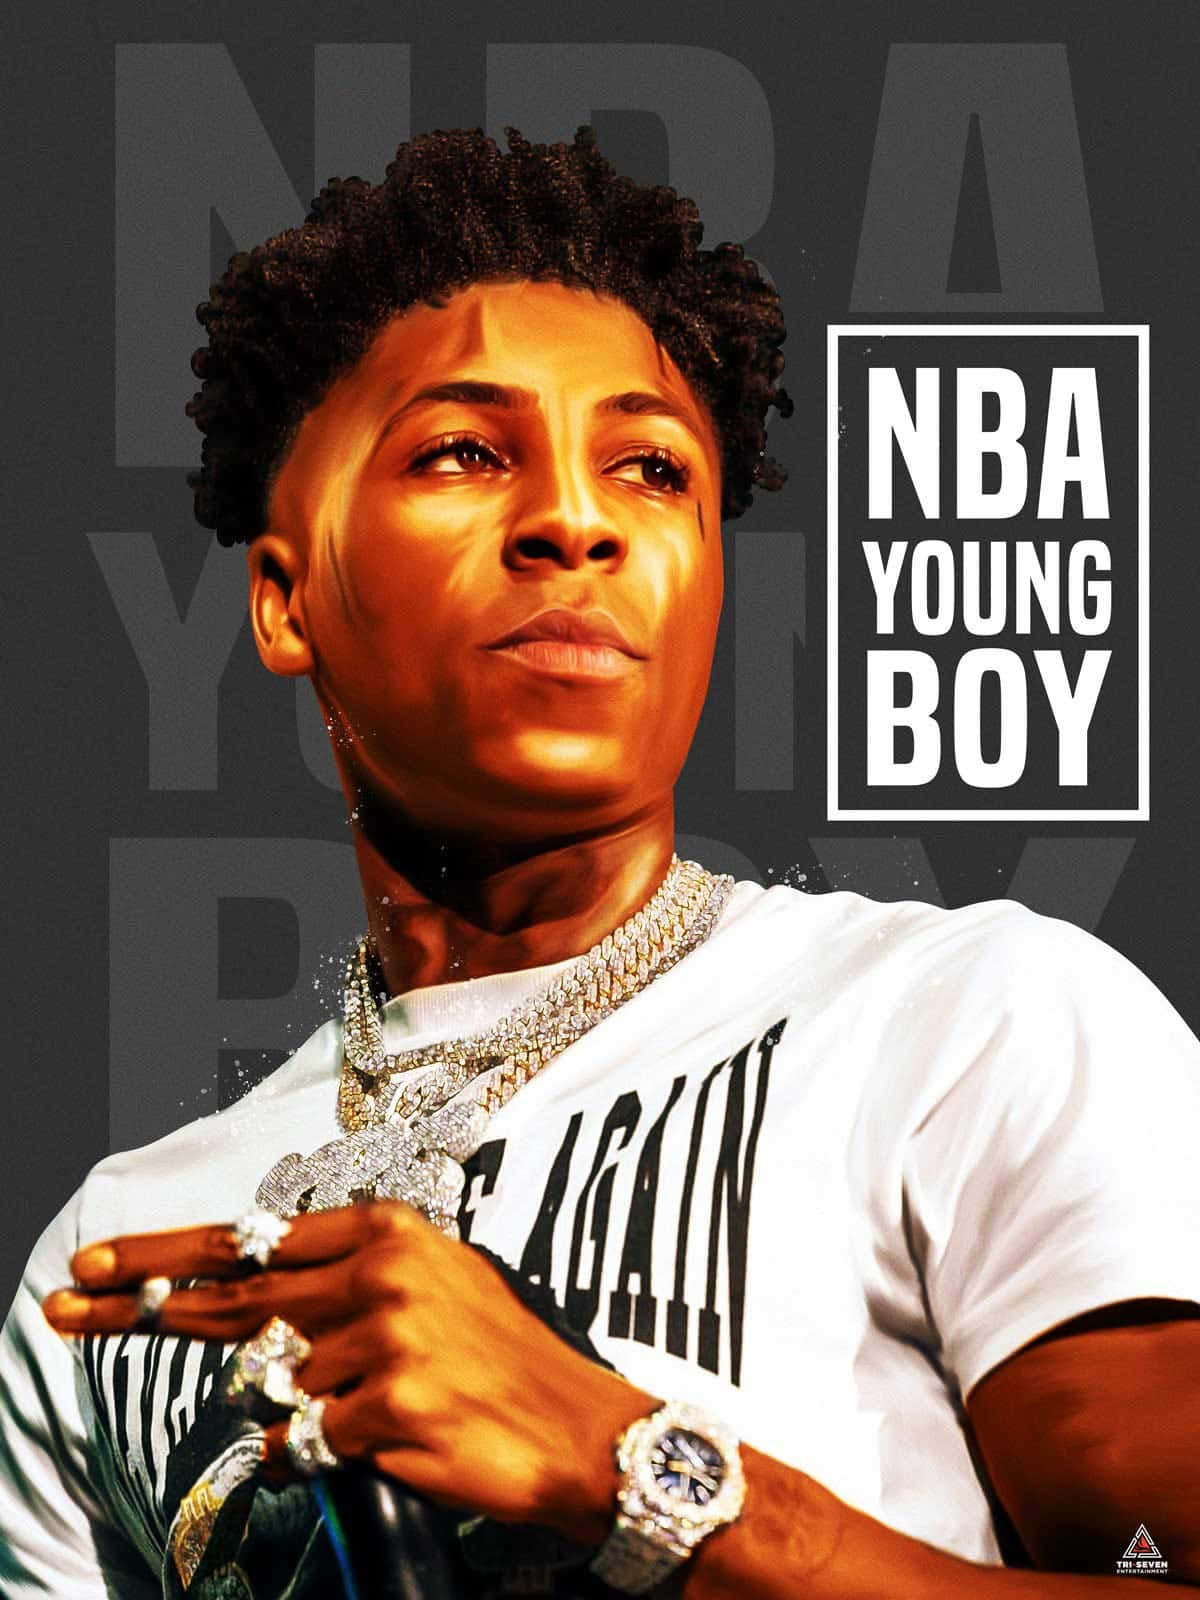 Download Rapper NBA Youngboy Poses For The Camera | Wallpapers.com